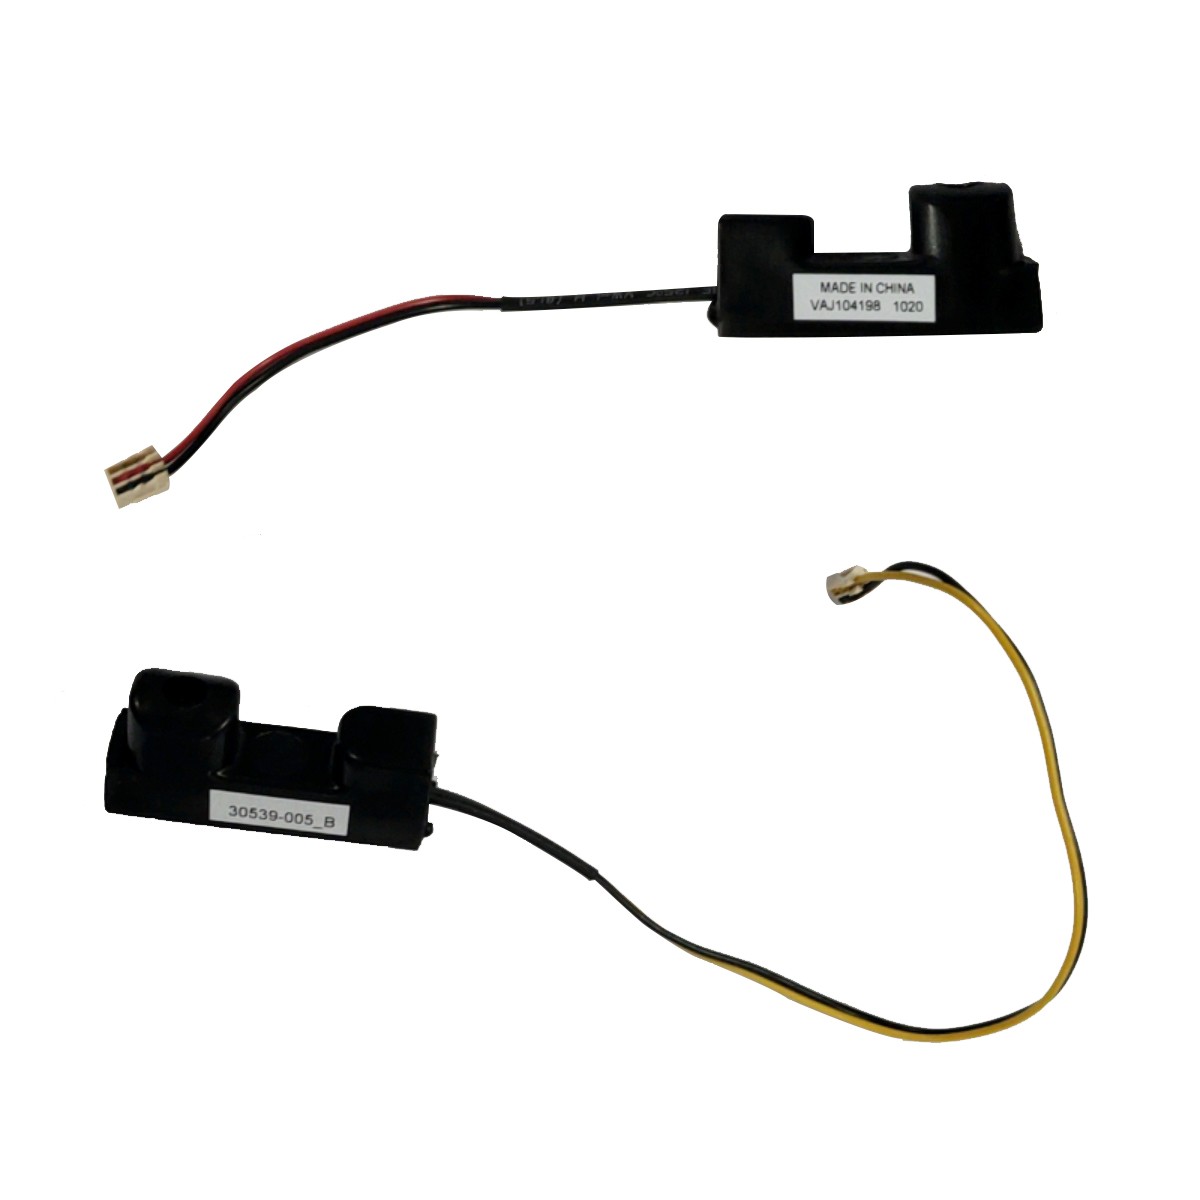 Strip the sensor for For (ZB)110Xi4